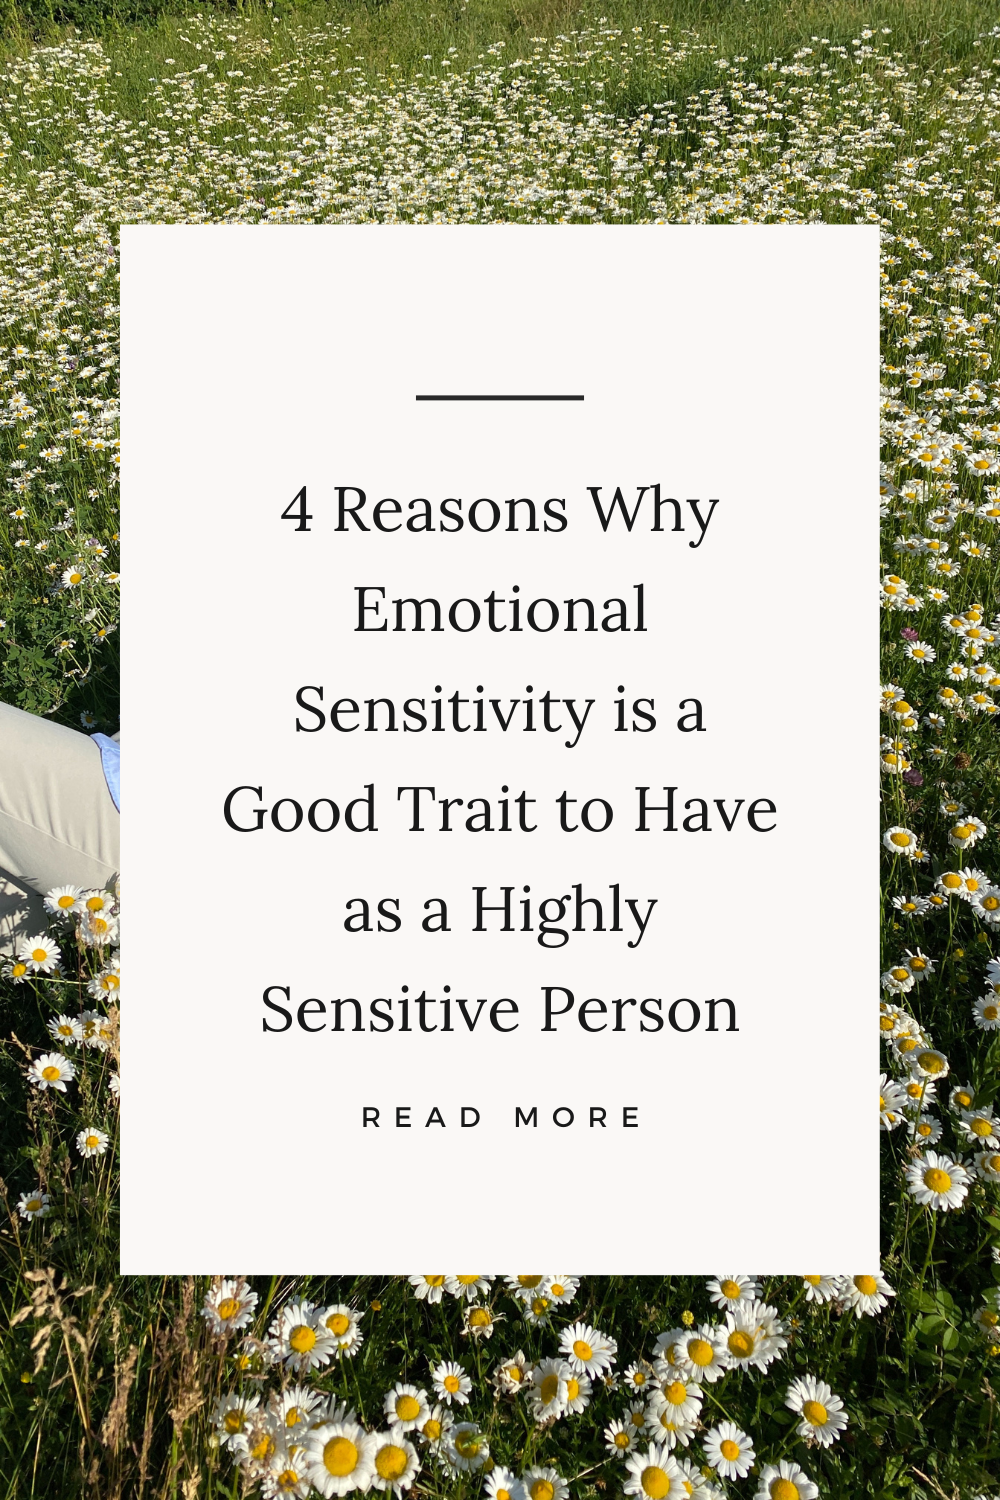 Traits of highly sensitive person, Highly sensitive person good traits, Highly sensitive person trait